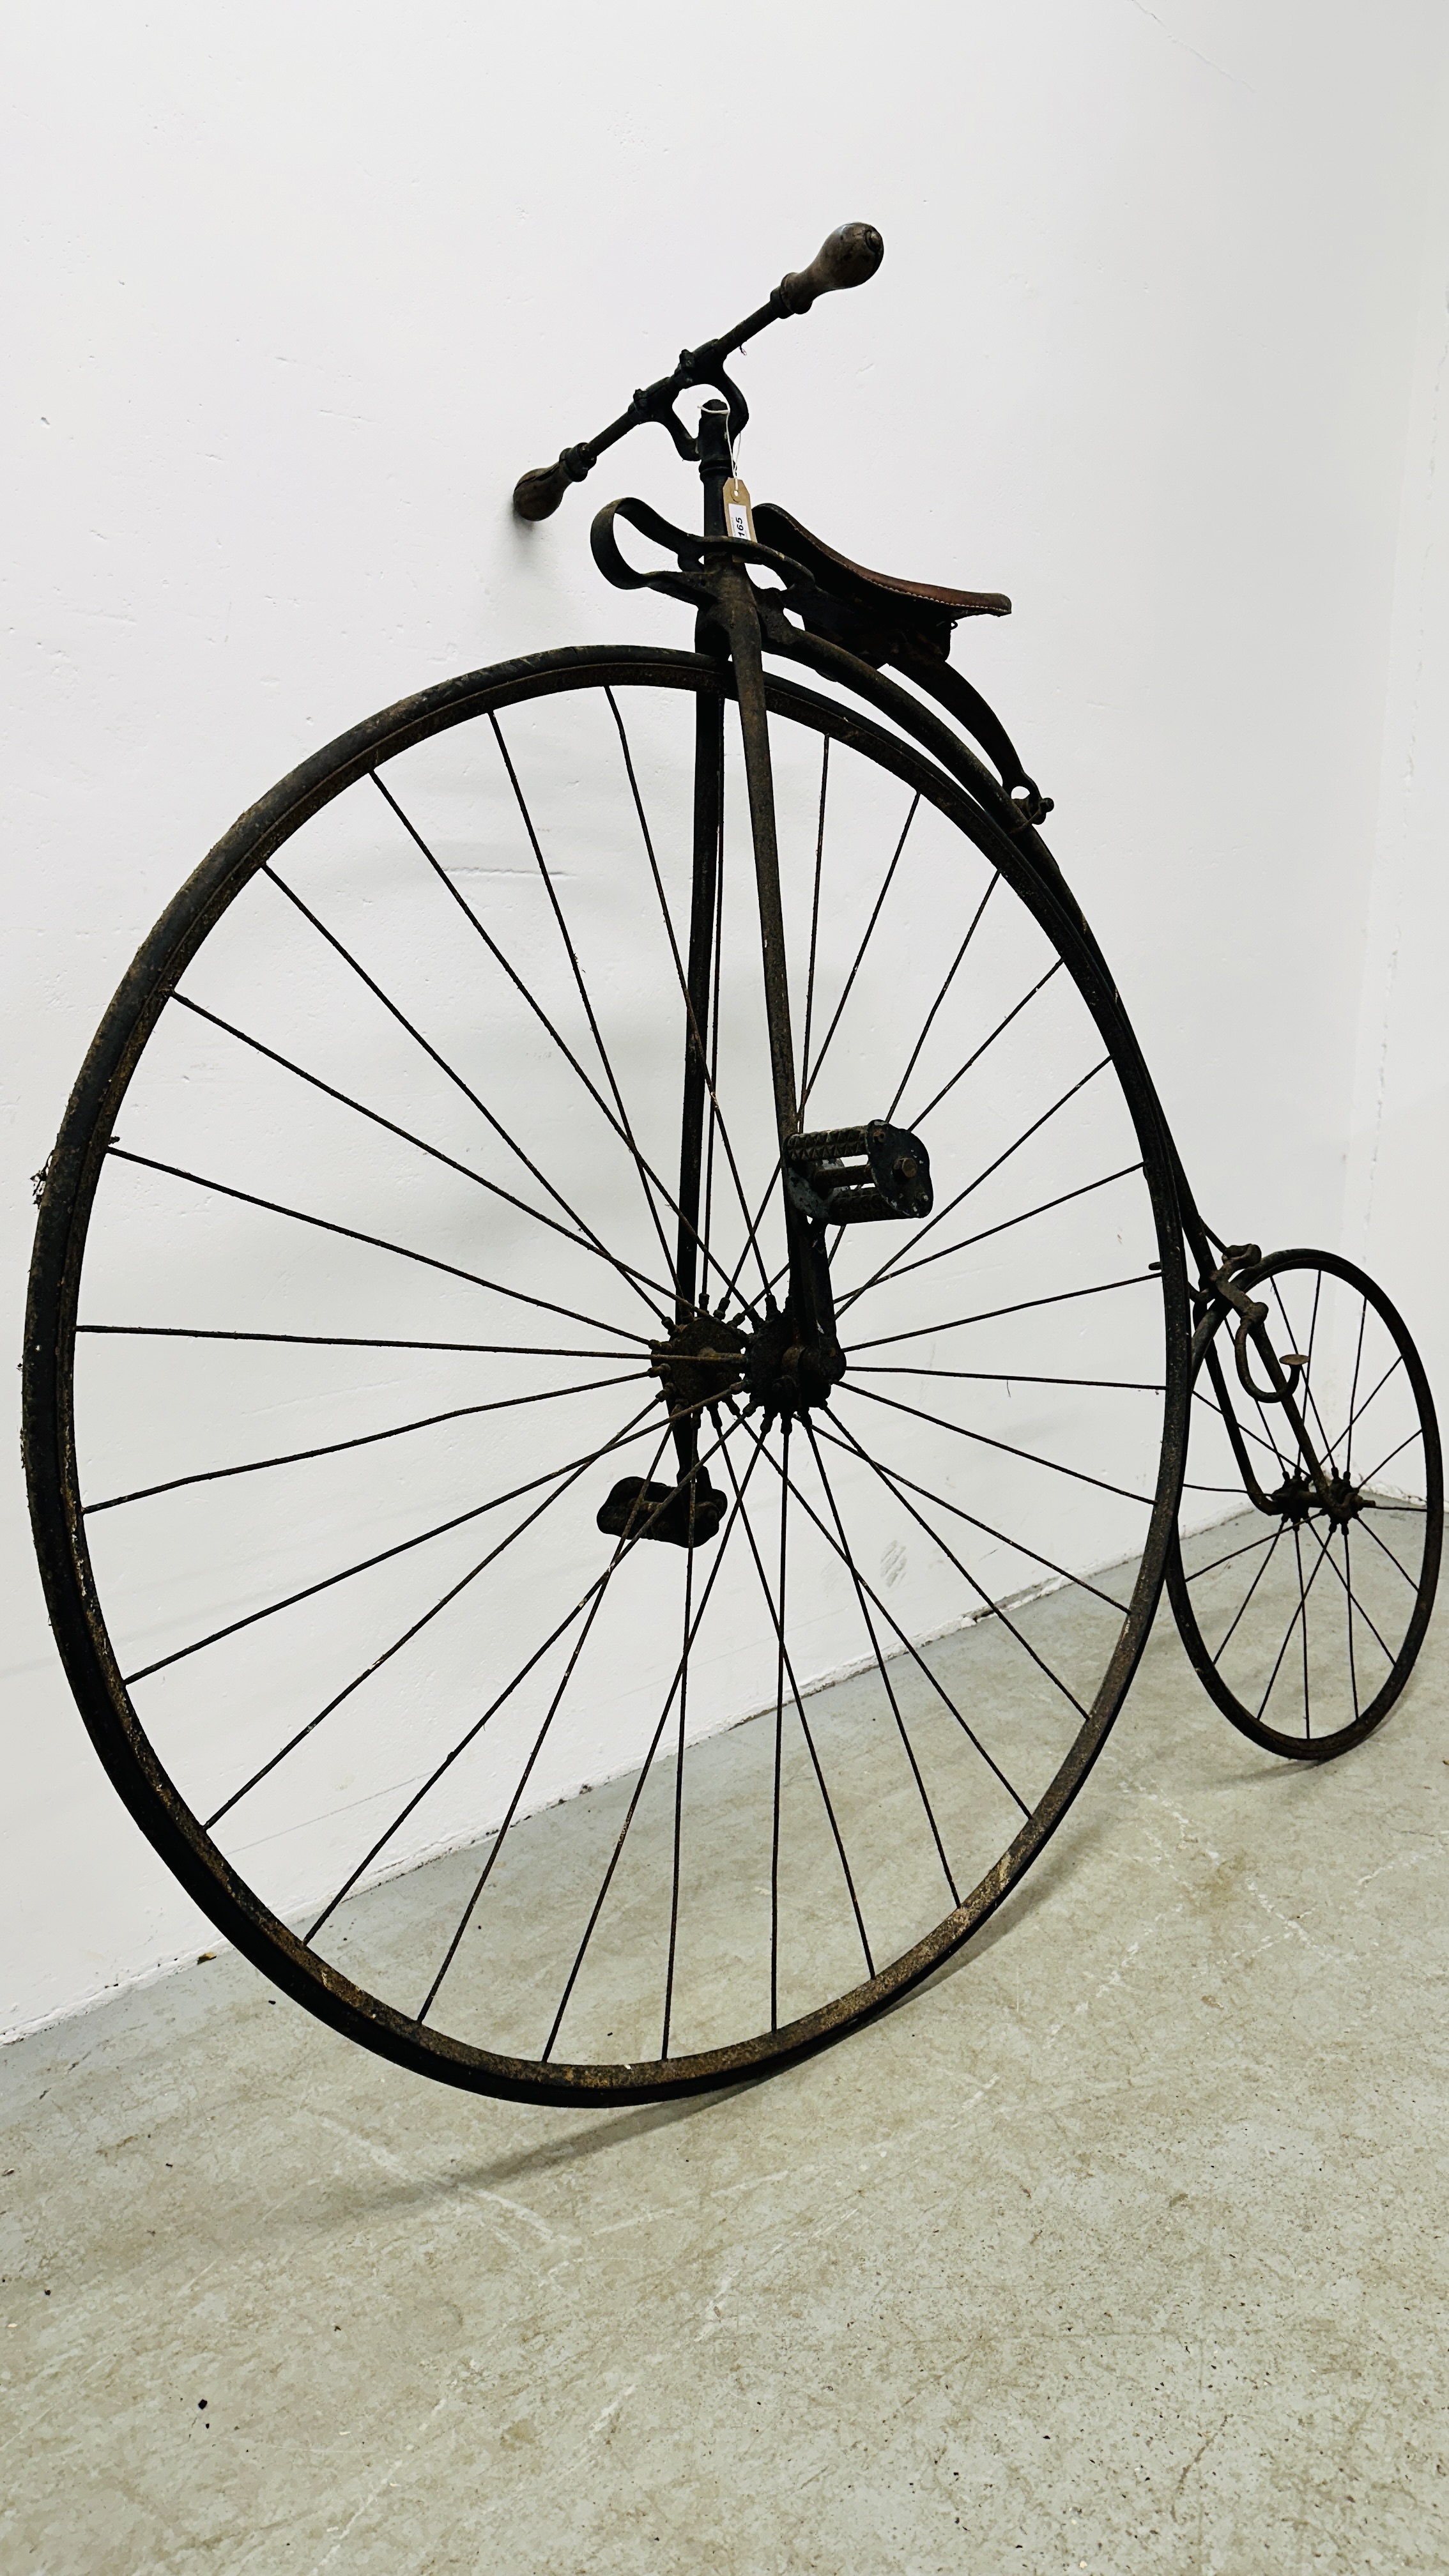 AN ANTIQUE PENNY FARTHING / HIGH WHEEL BICYCLE, HEIGHT 147CM, FRONT WHEEL RIM 119CM. - Image 20 of 20